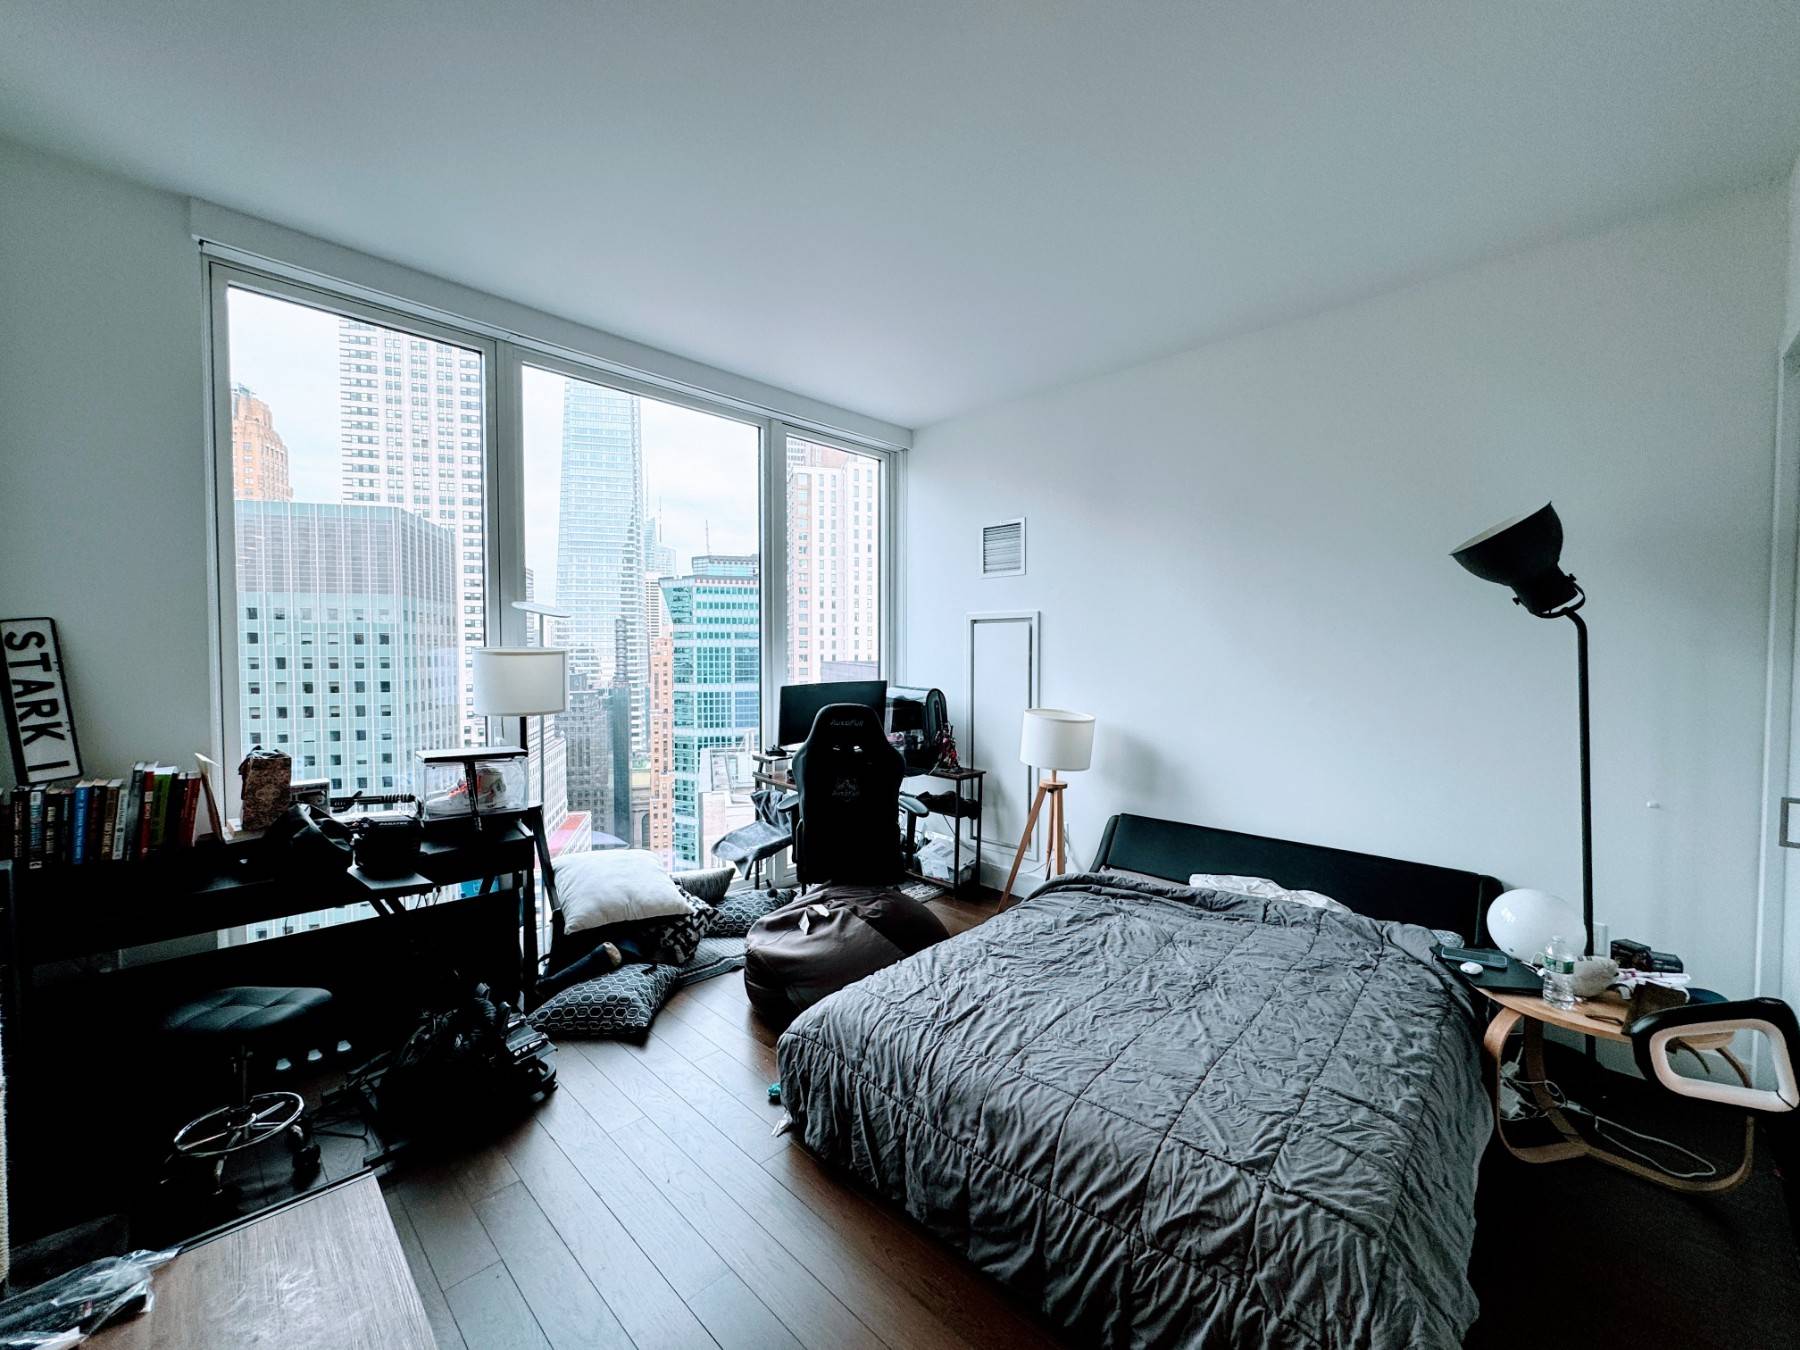 Experience luxury living at Summit, 222 East 44th street, in this spacious Studio apartment.